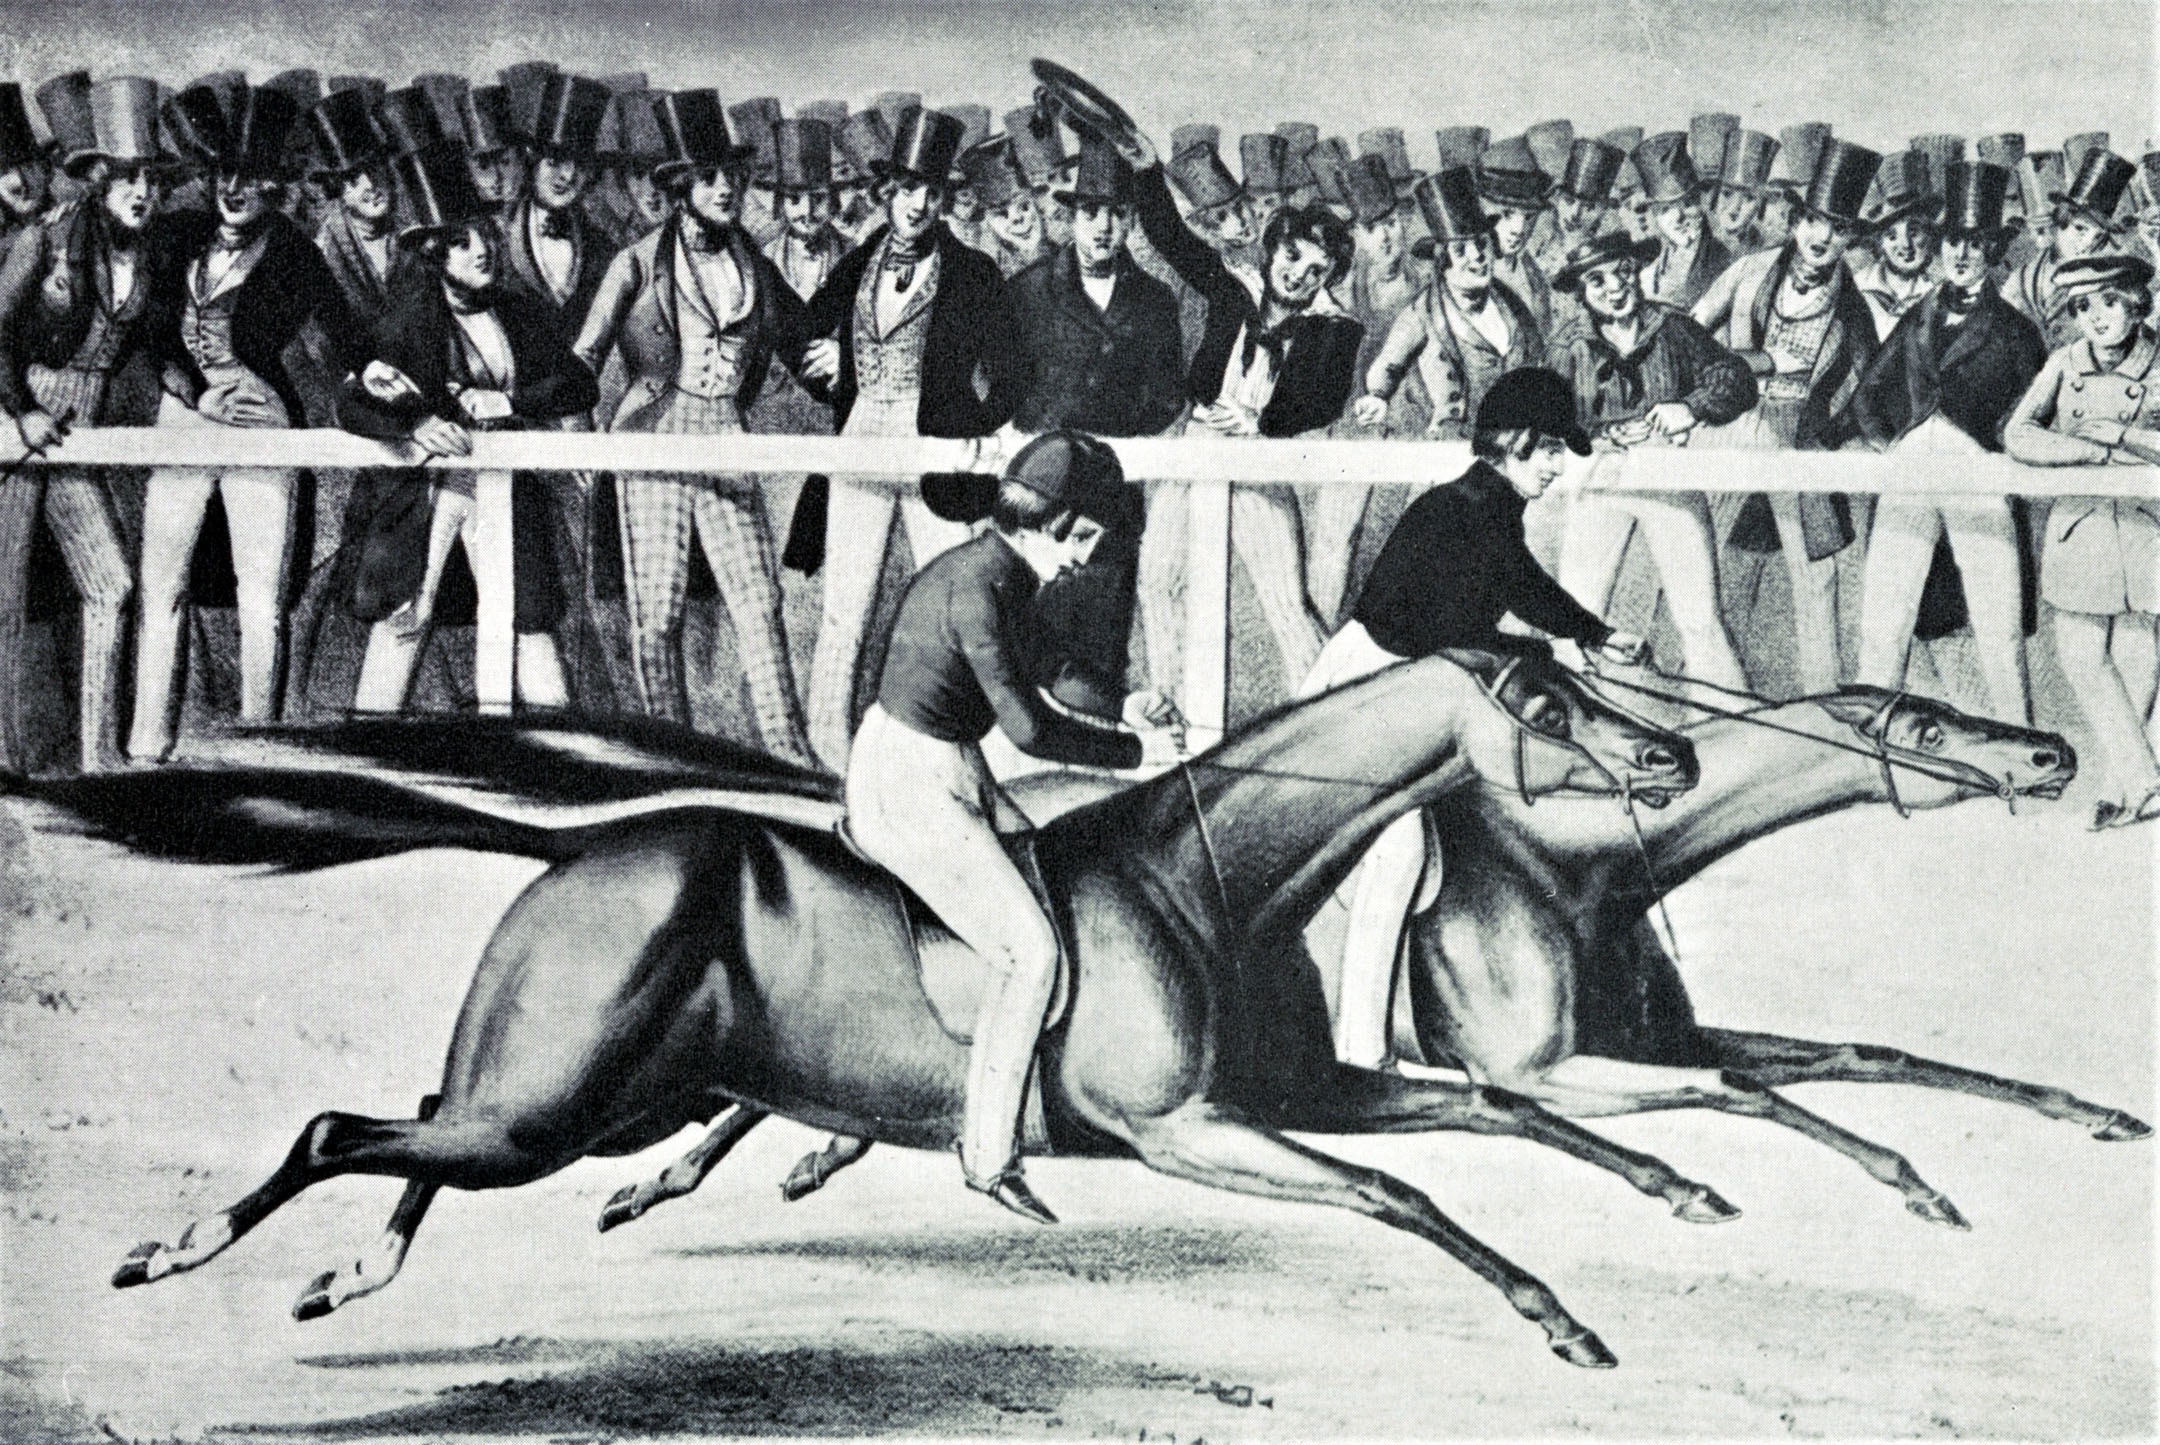 An illustration from Hervey's "Racing in America" depicting Gilbert W. Patrick (Gilpatrick) and Boston defeating Fashion at the Union Course match race on May 10, 1842 (Keeneland Library Collection/Museum Collection)